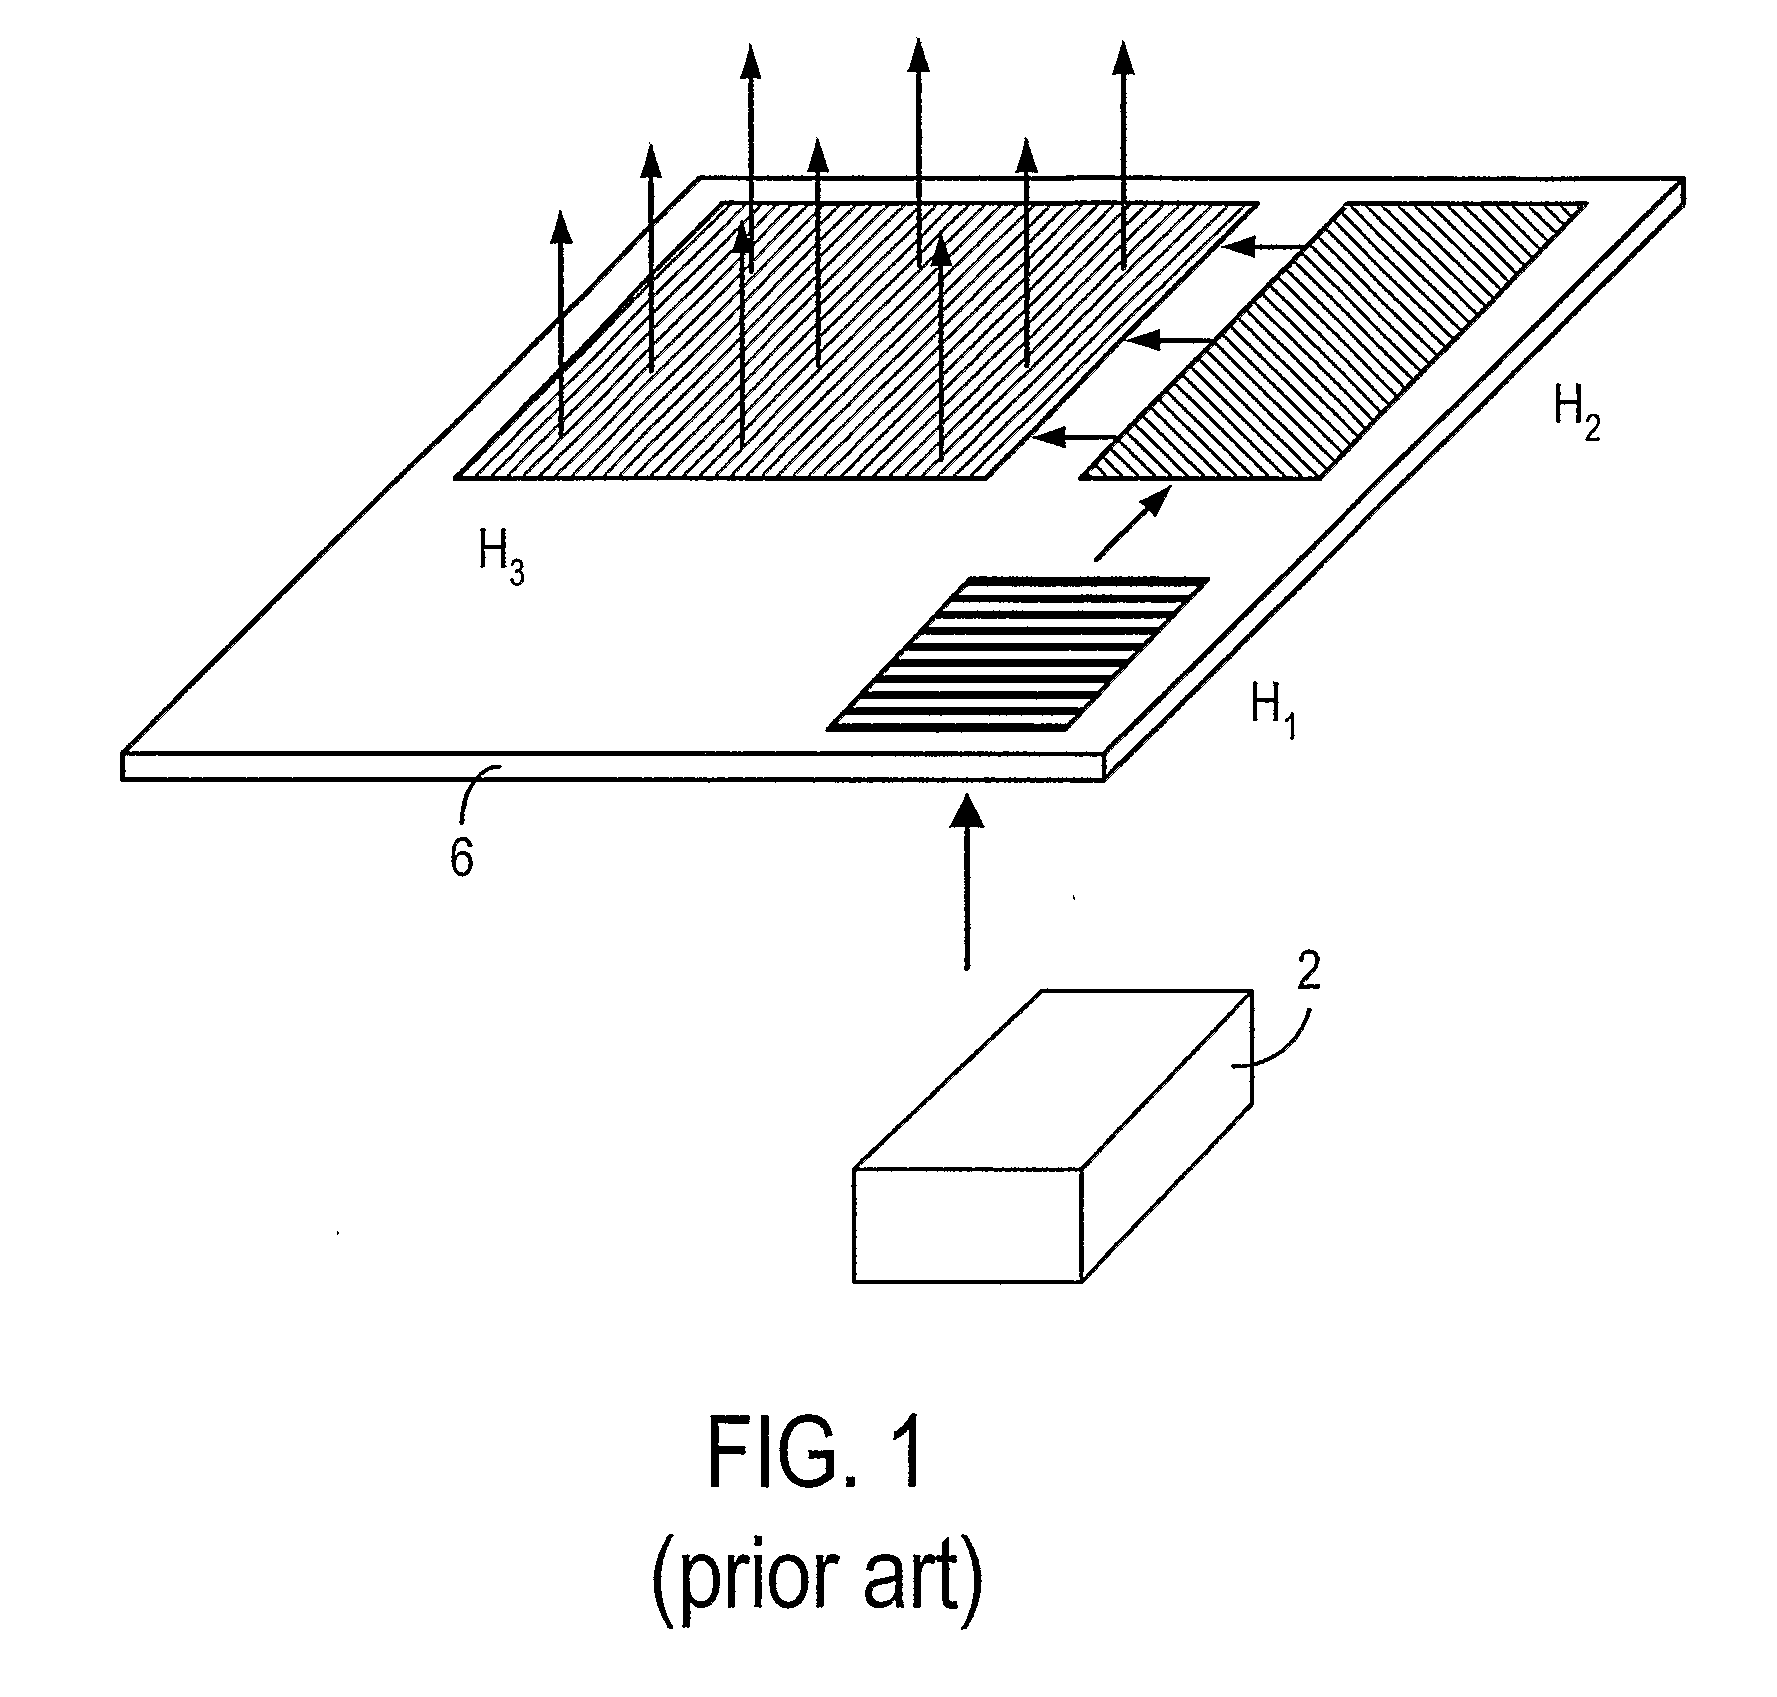 General diffractive optics method for expanding an exit pupil